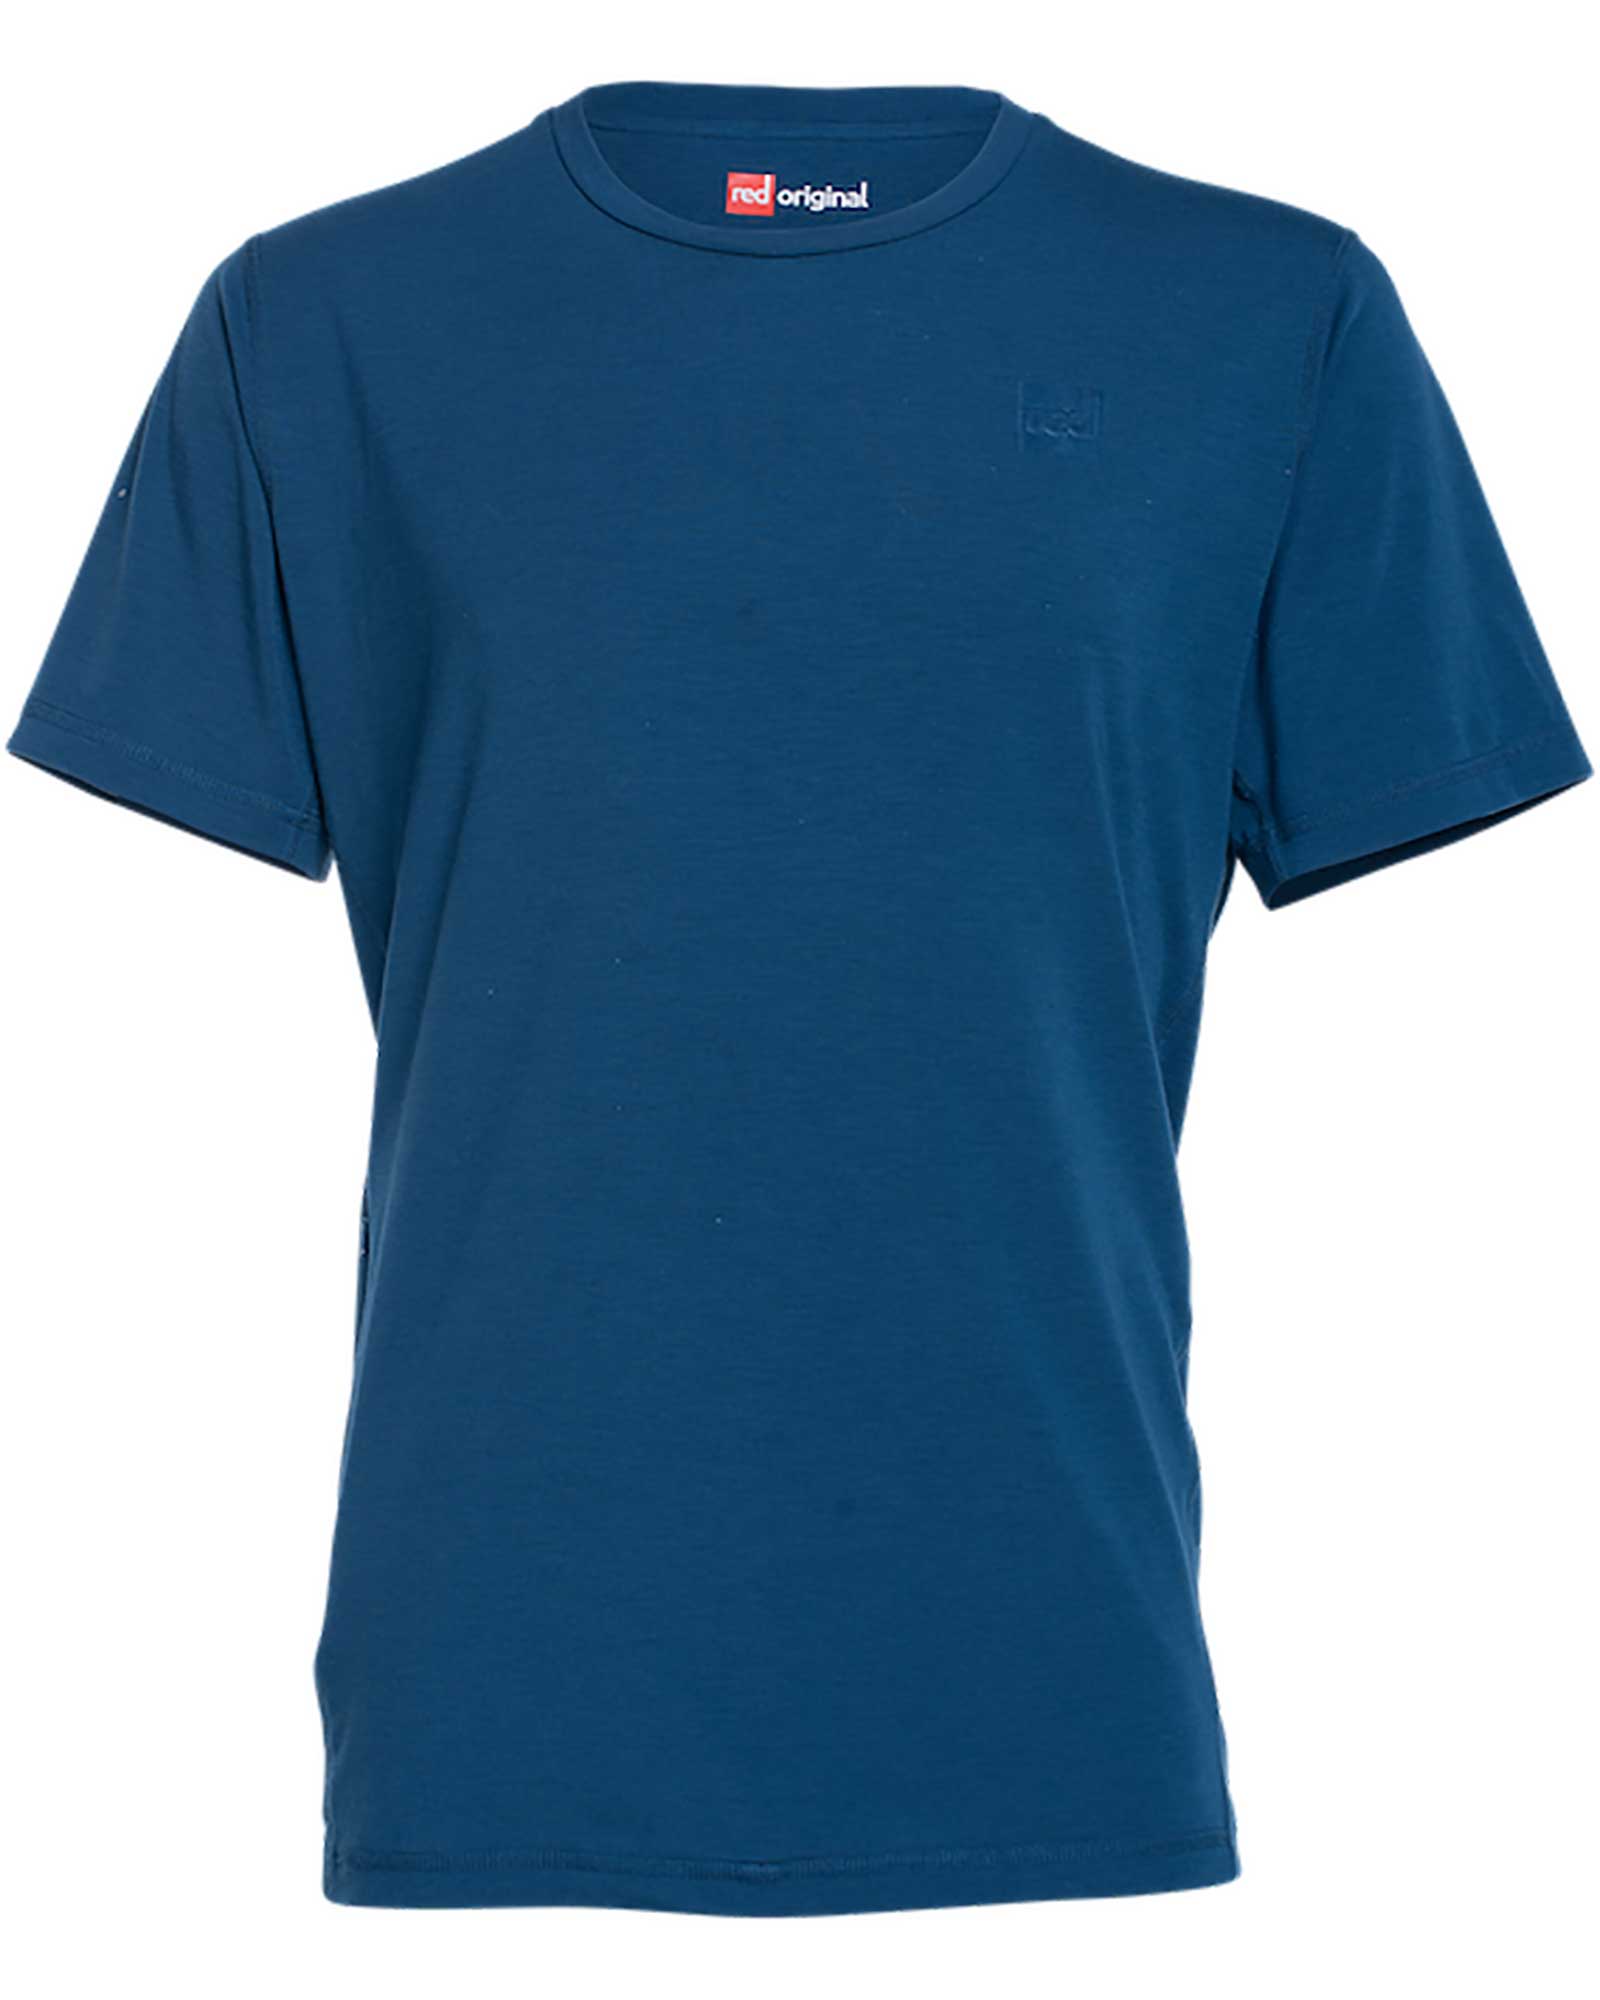 Product image of Red Paddle Co Performance Men's T-Shirt